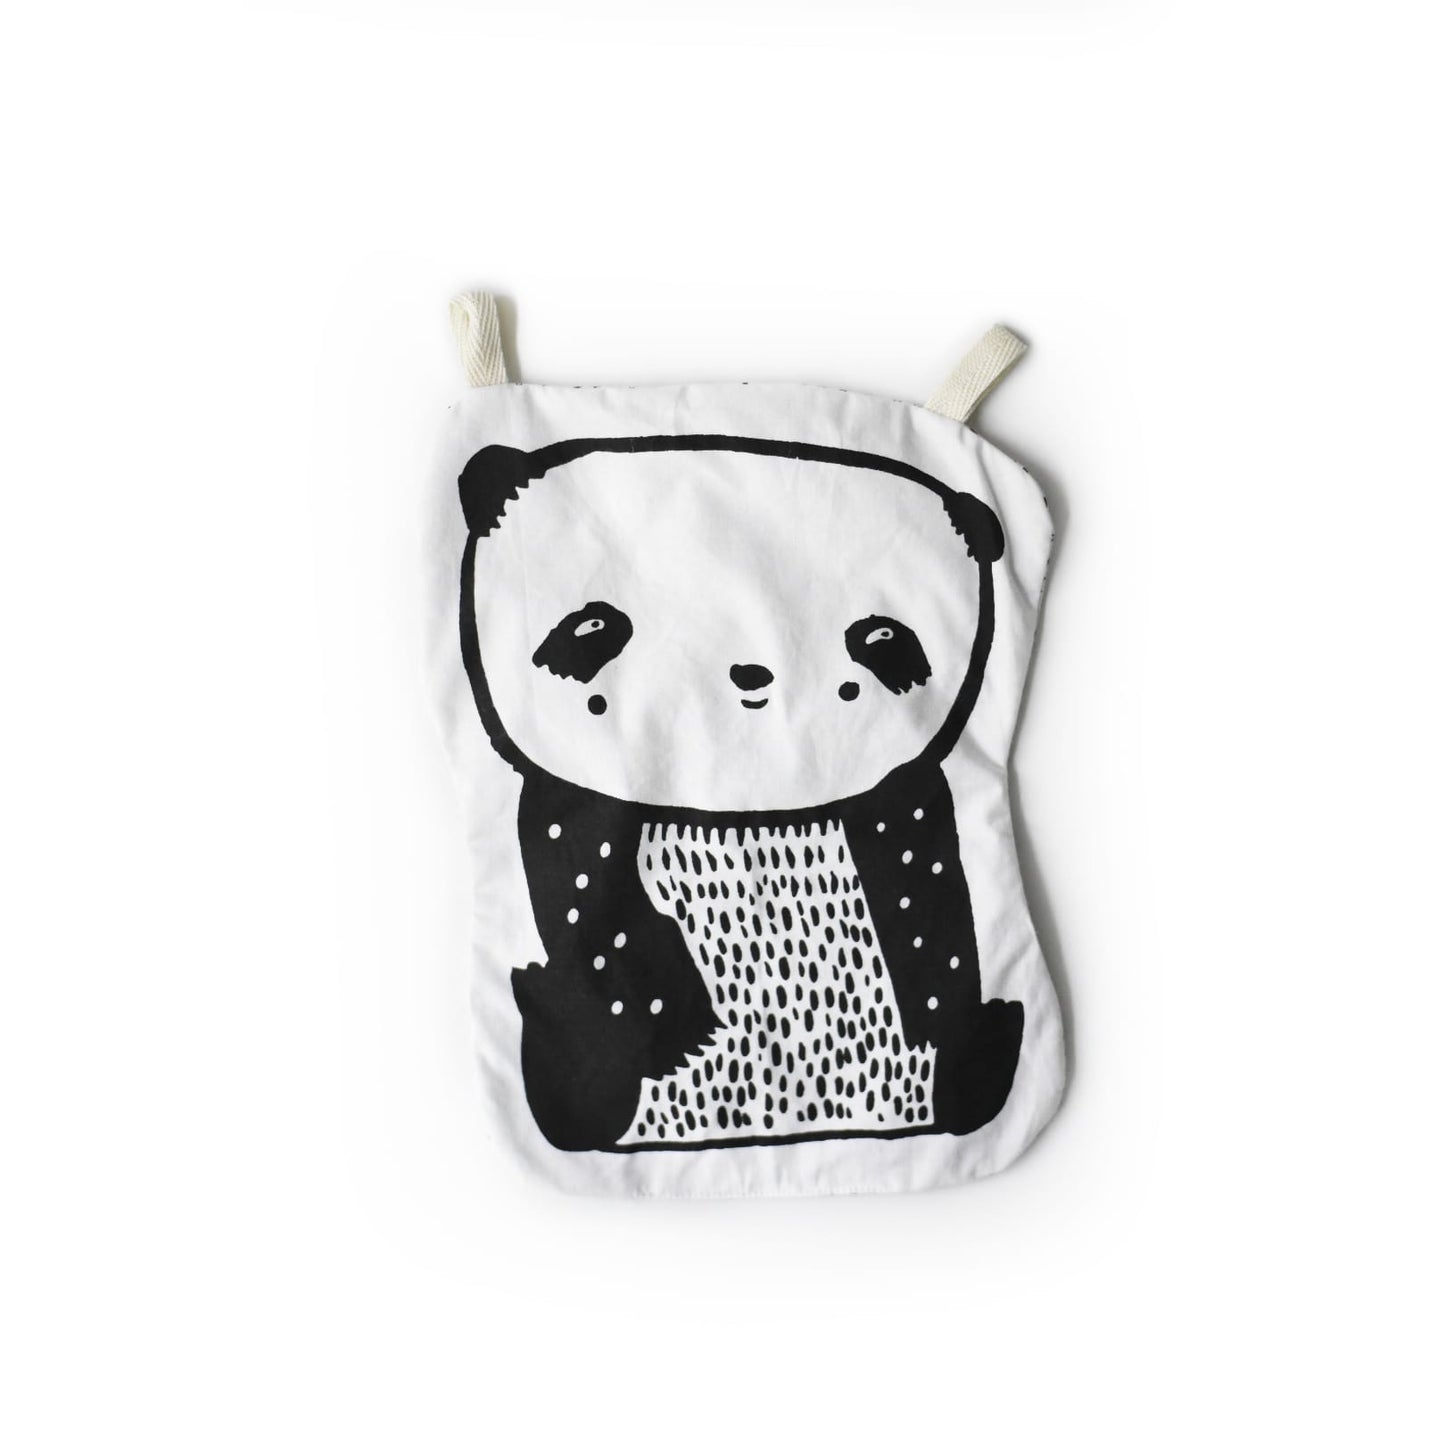 Organic cotton panda crinkle baby toy from Wee Gallery